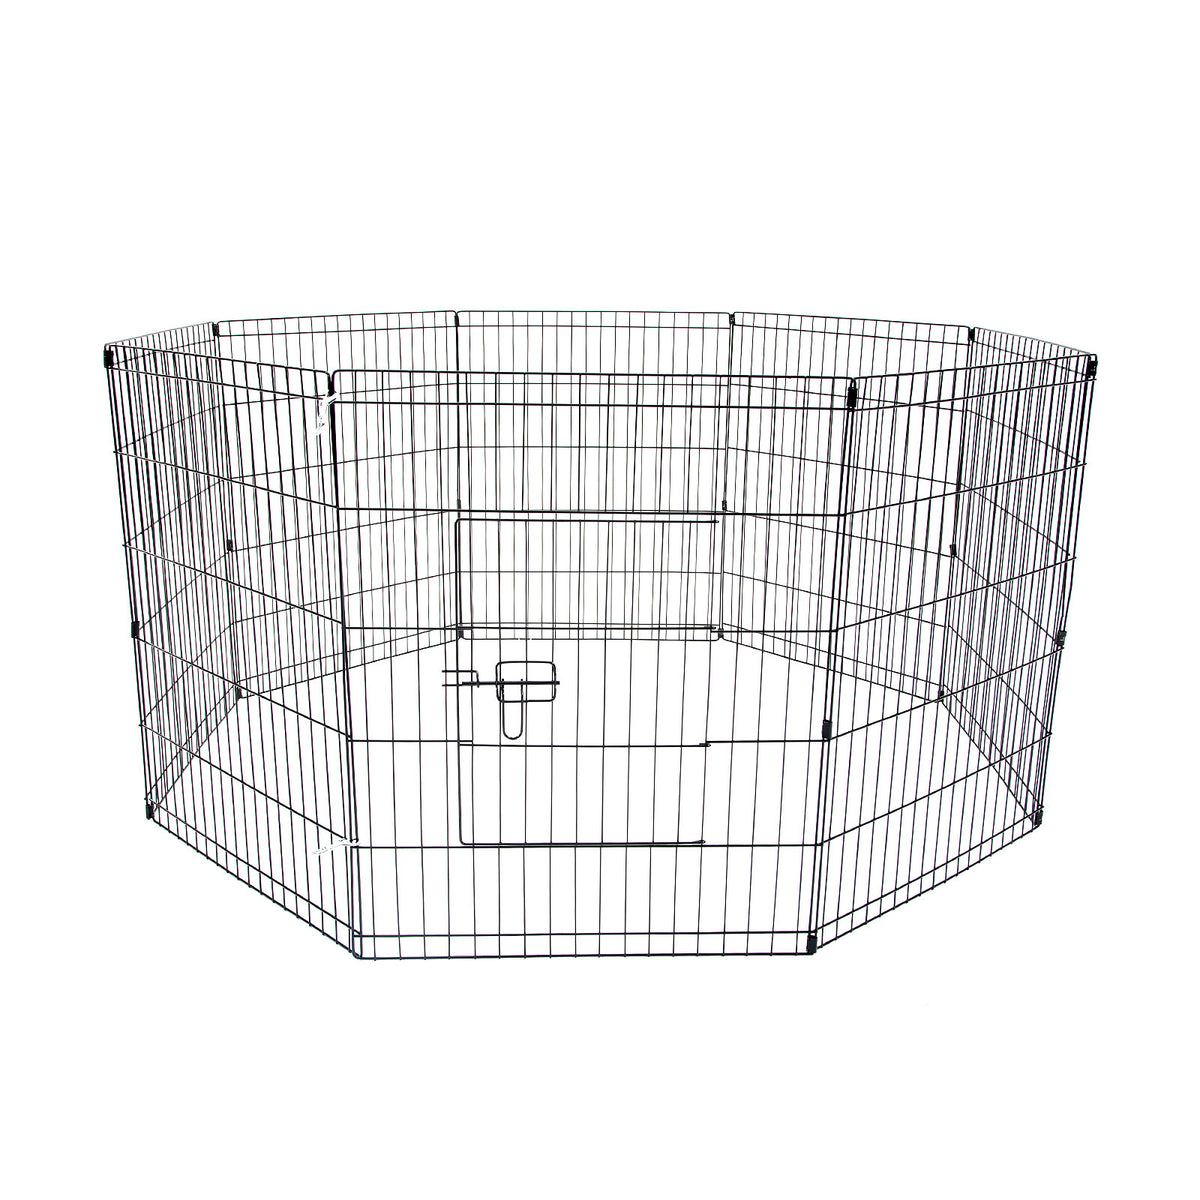 Paw Mate Pet Playpen 8 Panel 24in Foldable Dog Exercise Enclosure Fence Cage